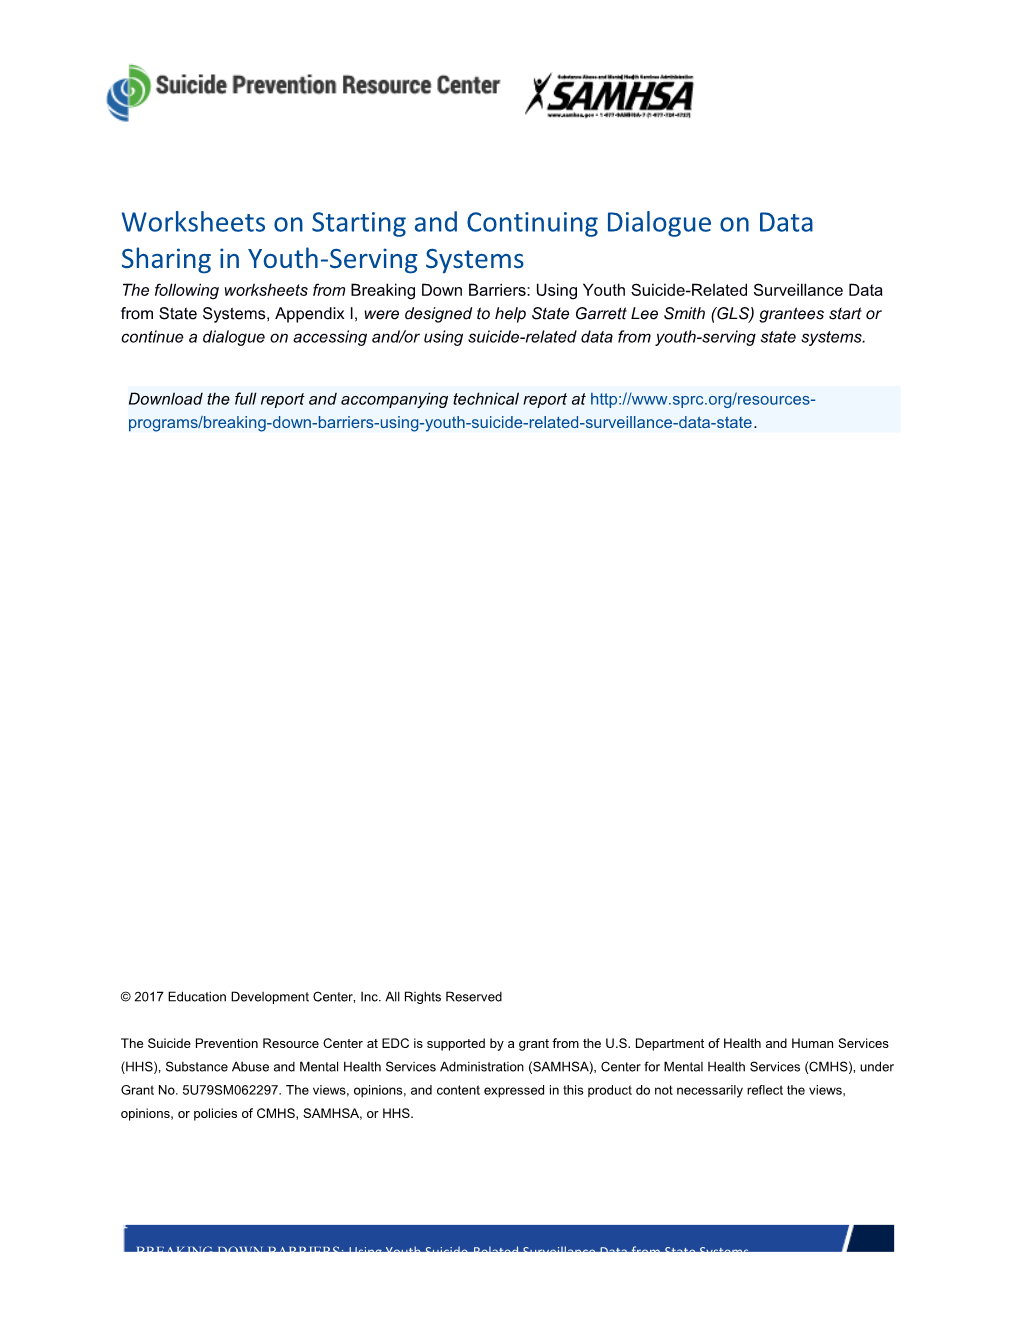 Worksheets on Starting and Continuing Dialogue on Data Sharing in Youth-Serving Systems